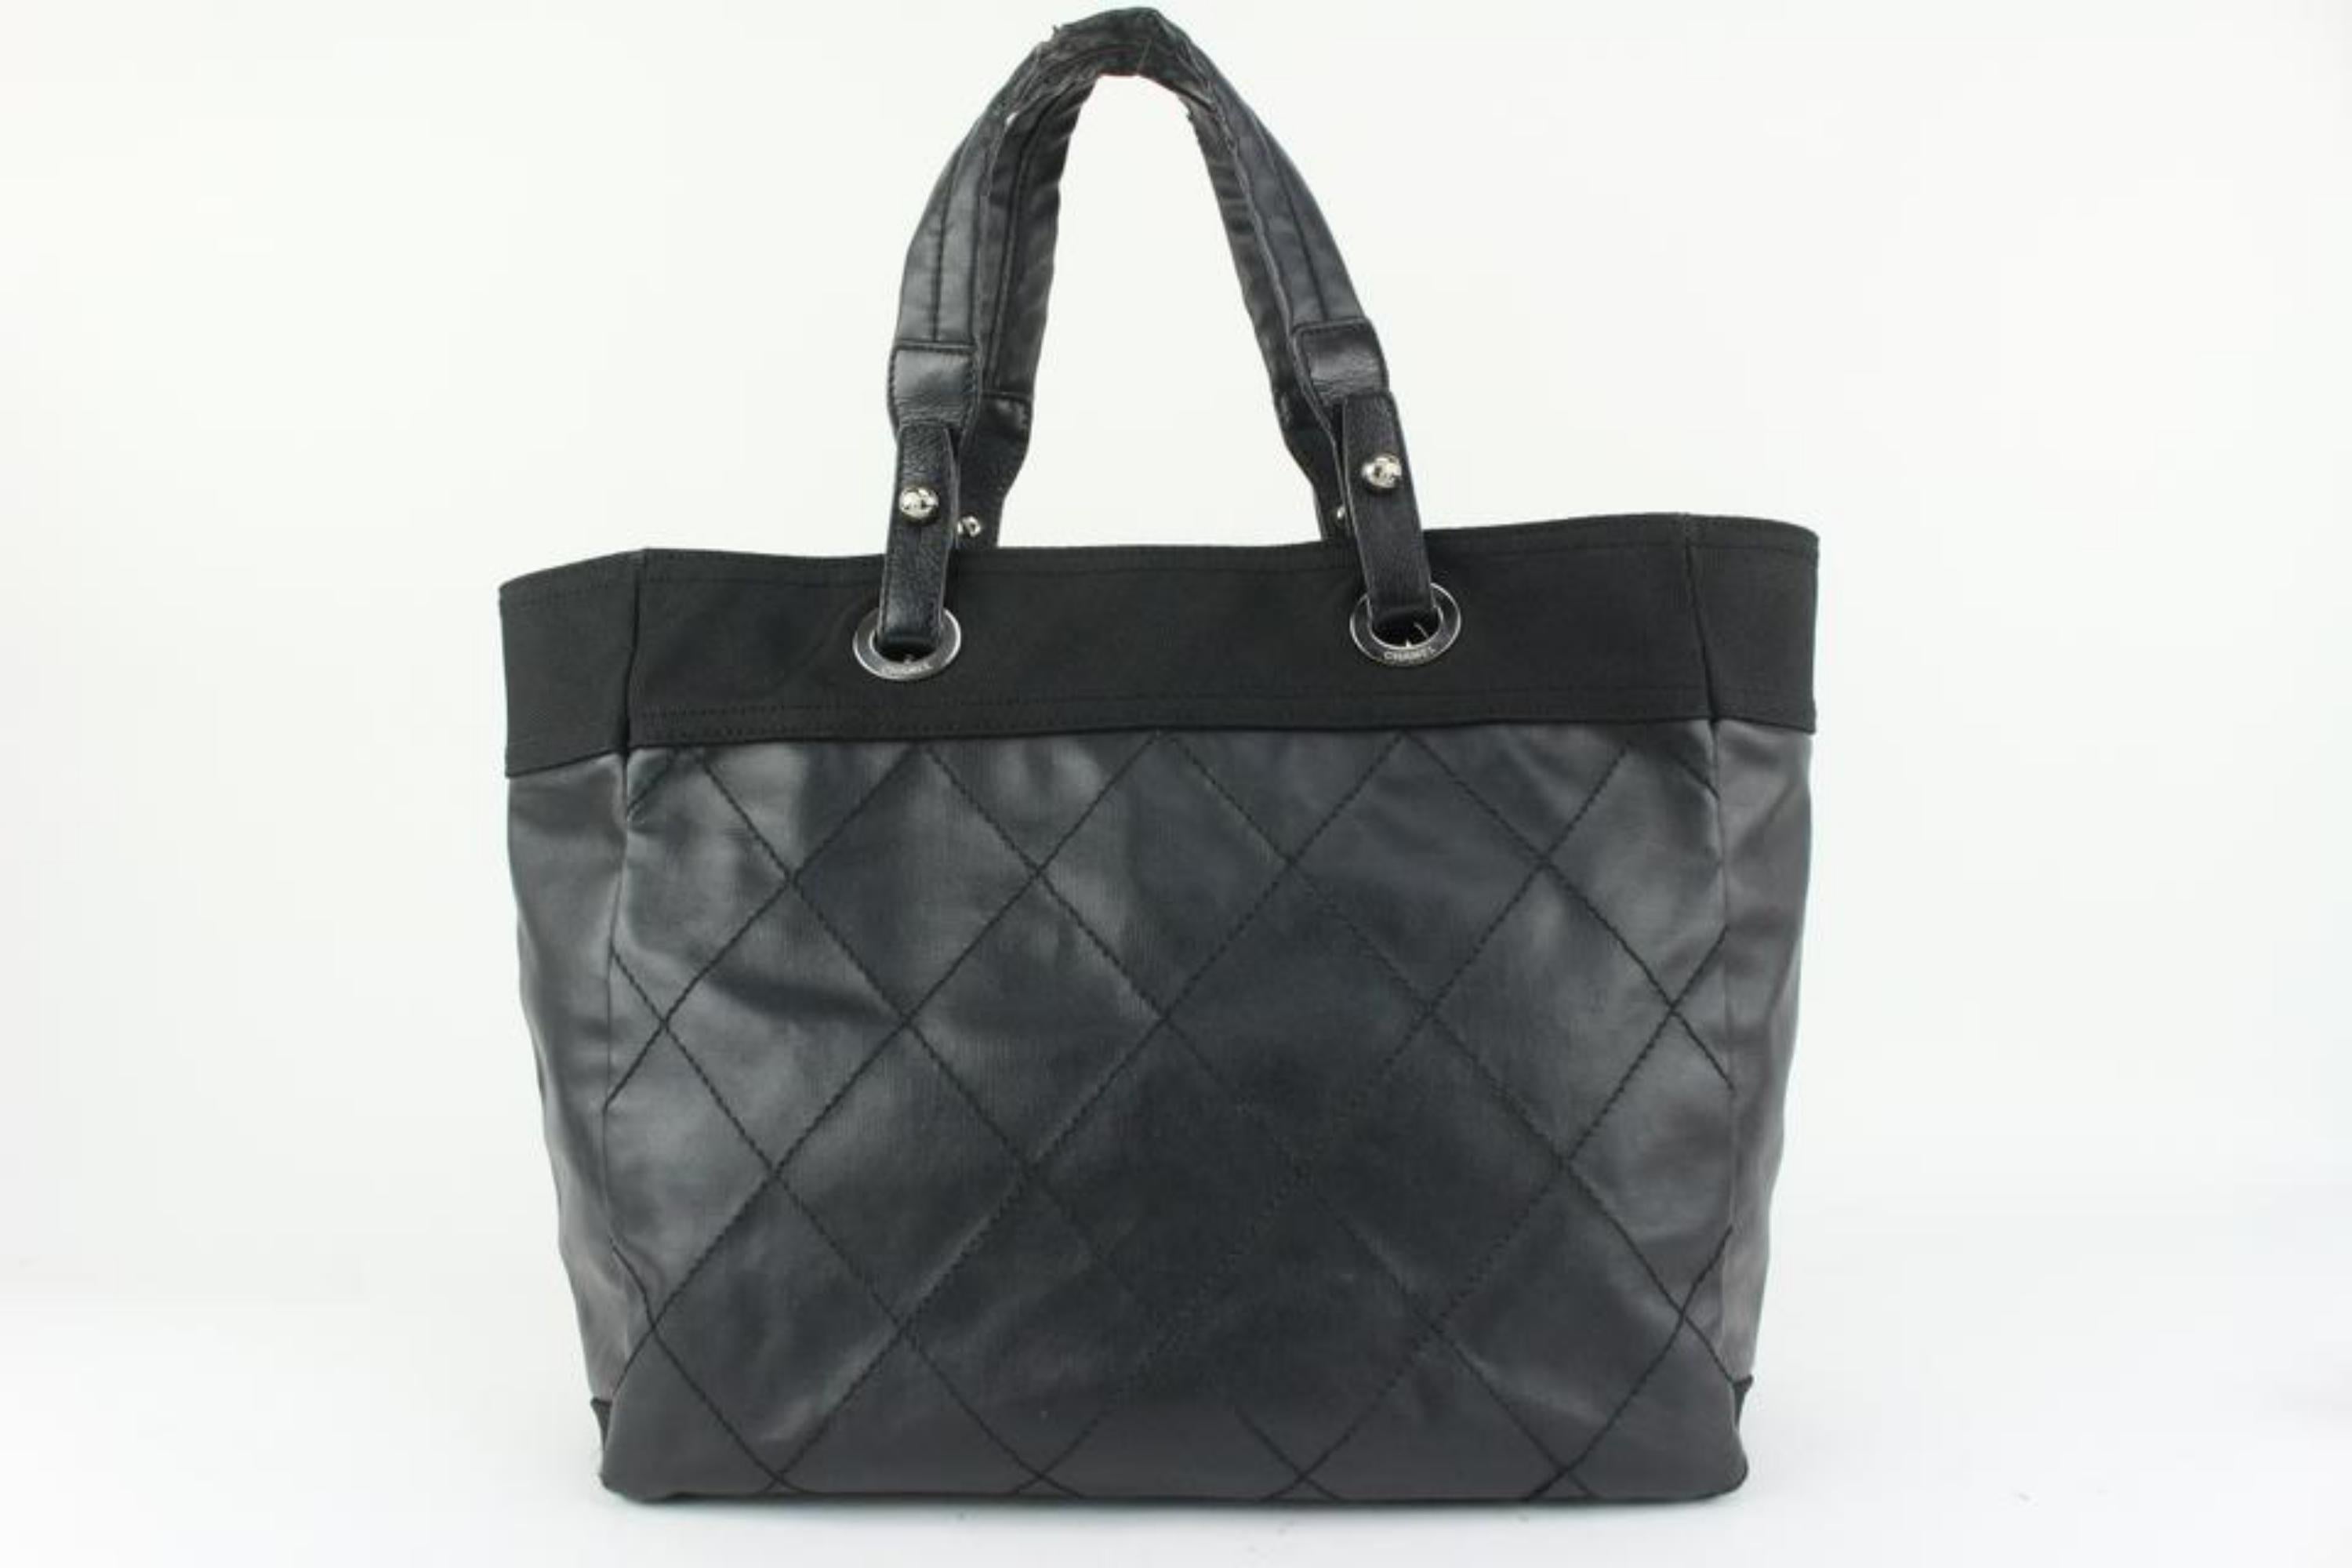 Chanel Large Black Quilted Biarritz GM Tote Bag 927ca51 For Sale 4